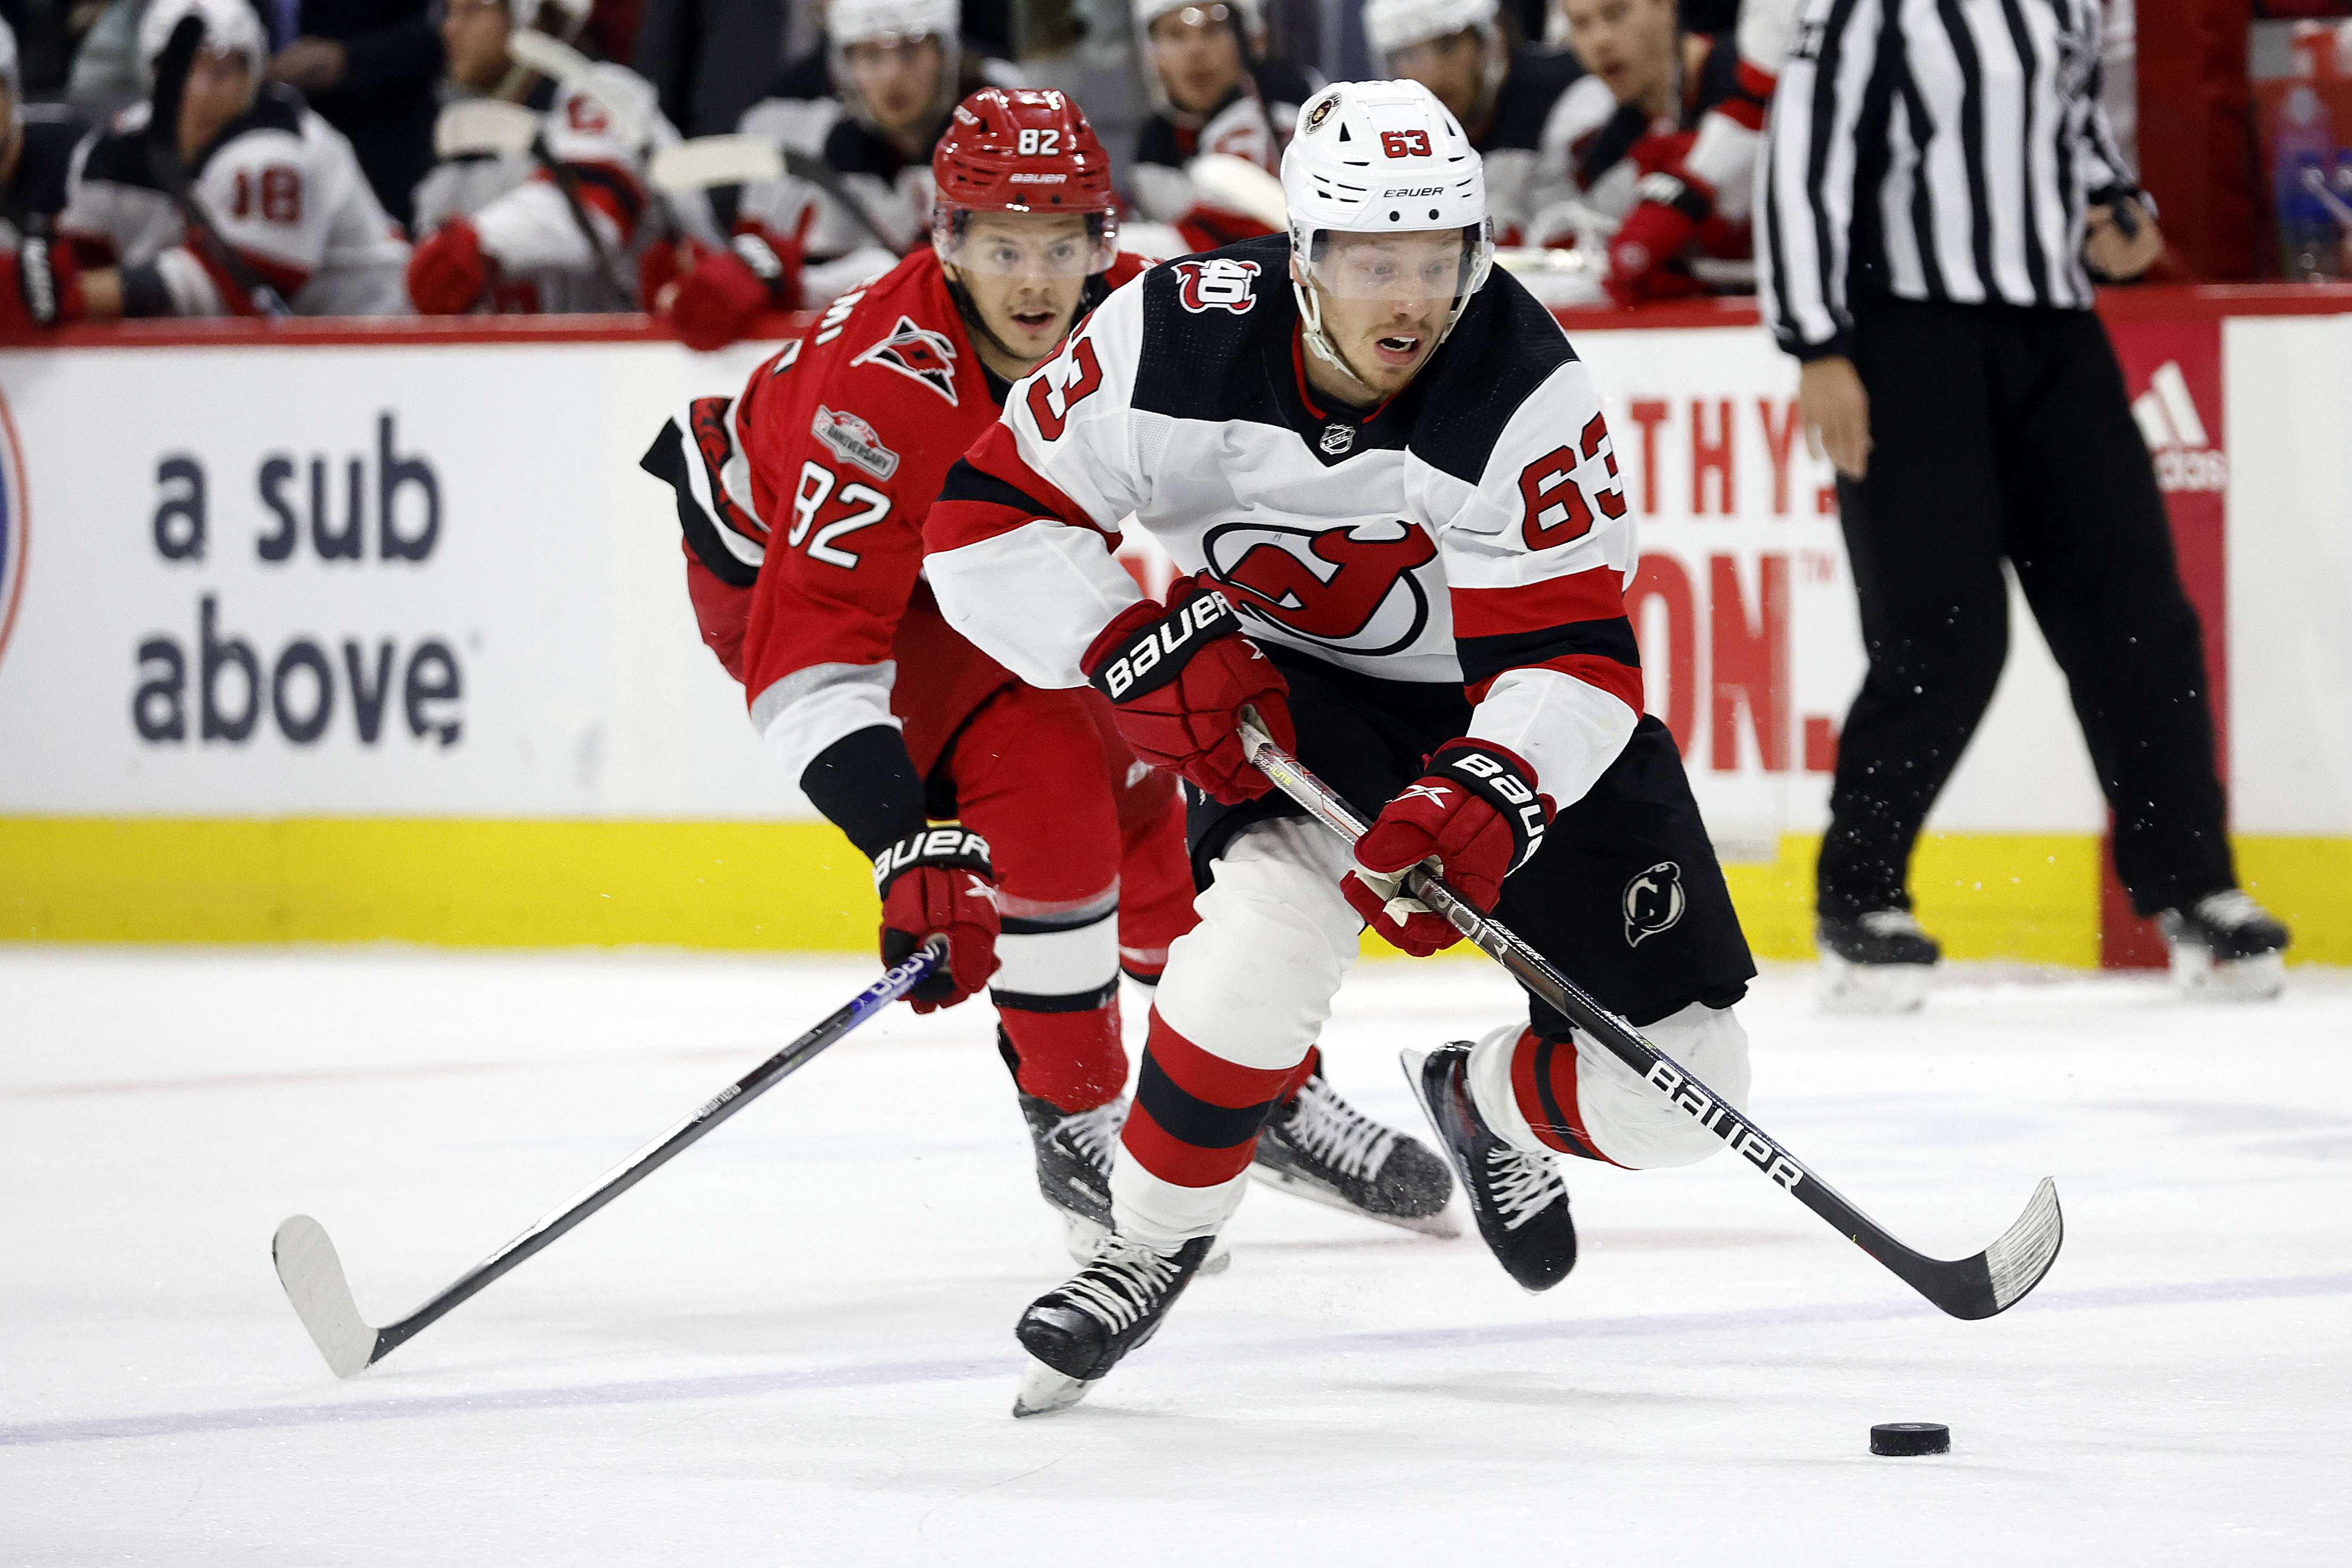 Lindy Ruff blames himself as Devils fail to clinch playoff spot in